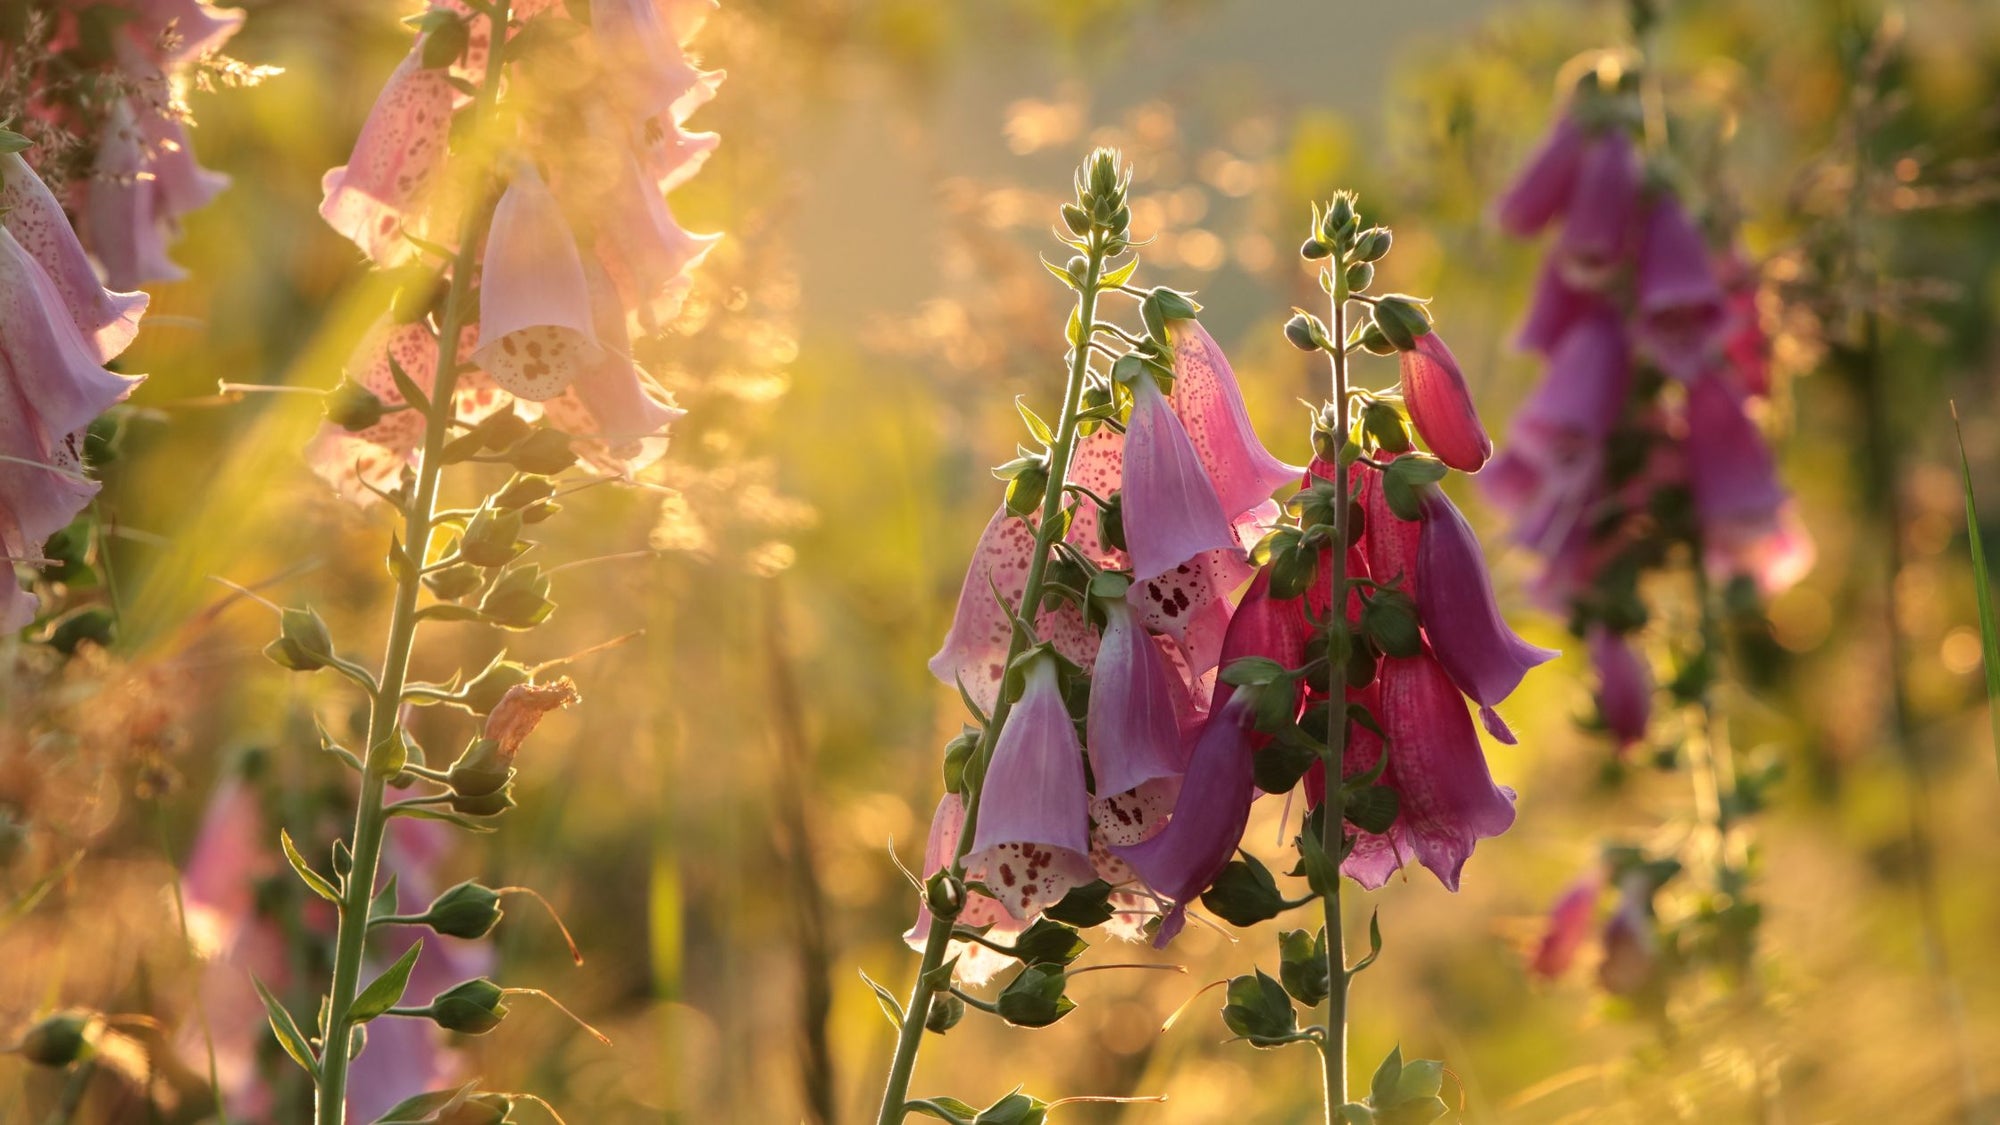 Glowing foxglove wildflowers bathed in golden sunlight, a stunning choice for wildflowers for the garden